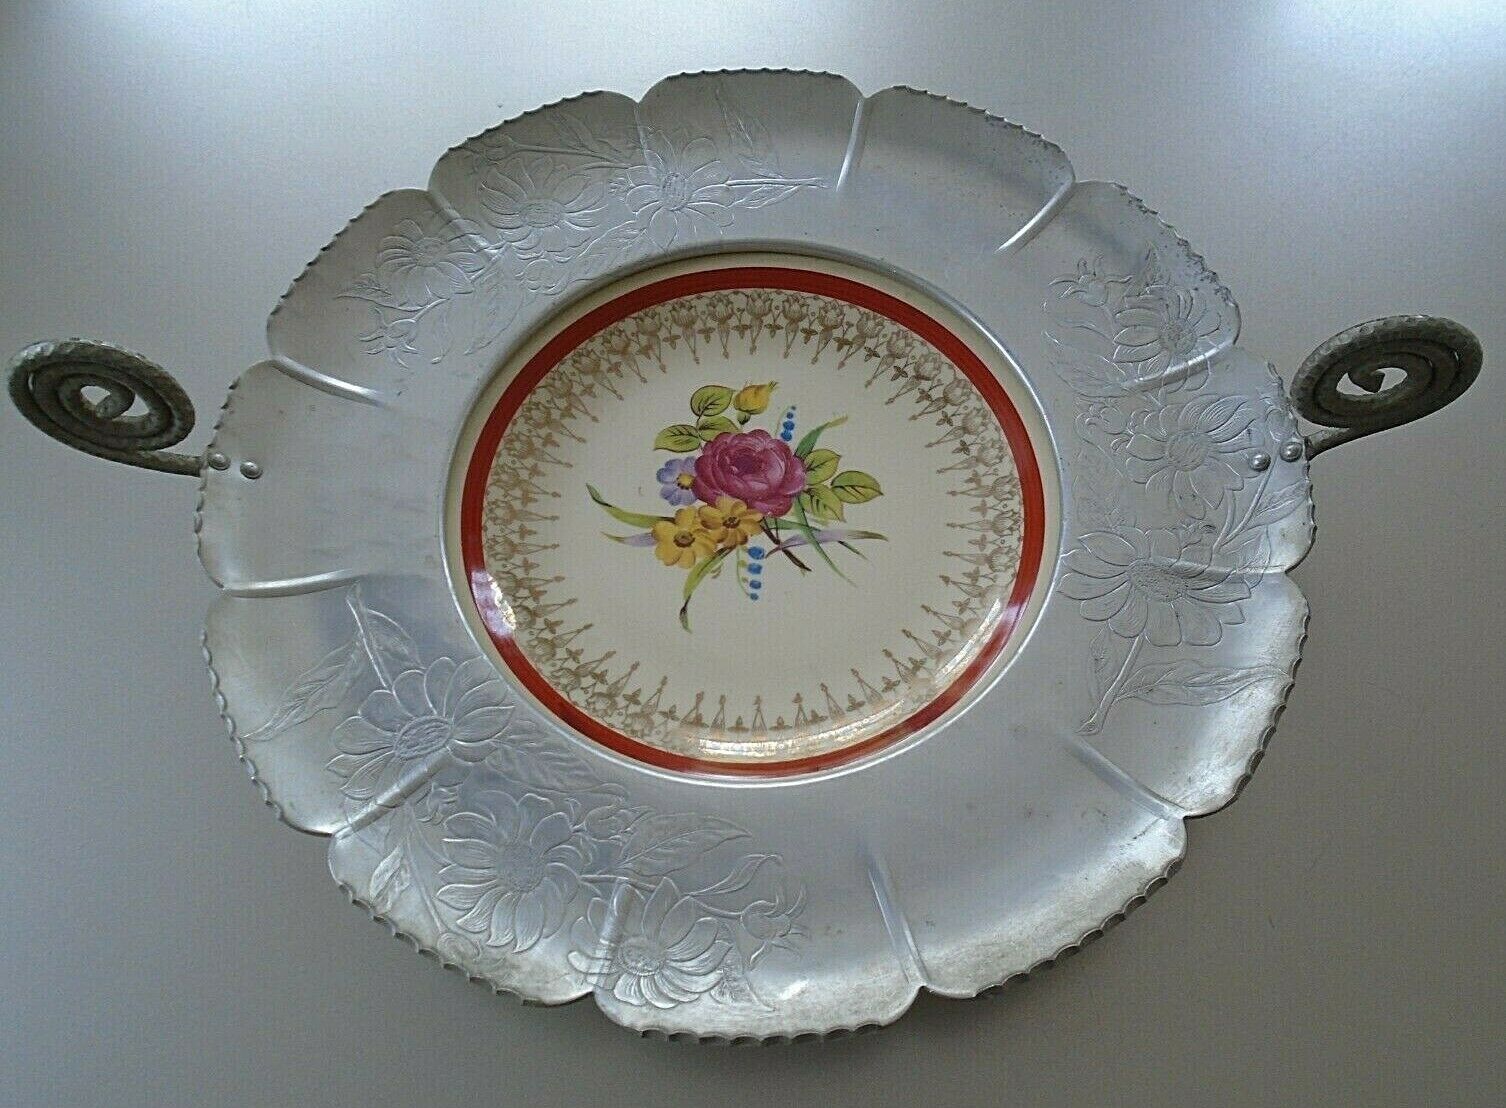 Vintage Paden City Pottery China & Farber & Shlevin Hand Wrought Serving Tray